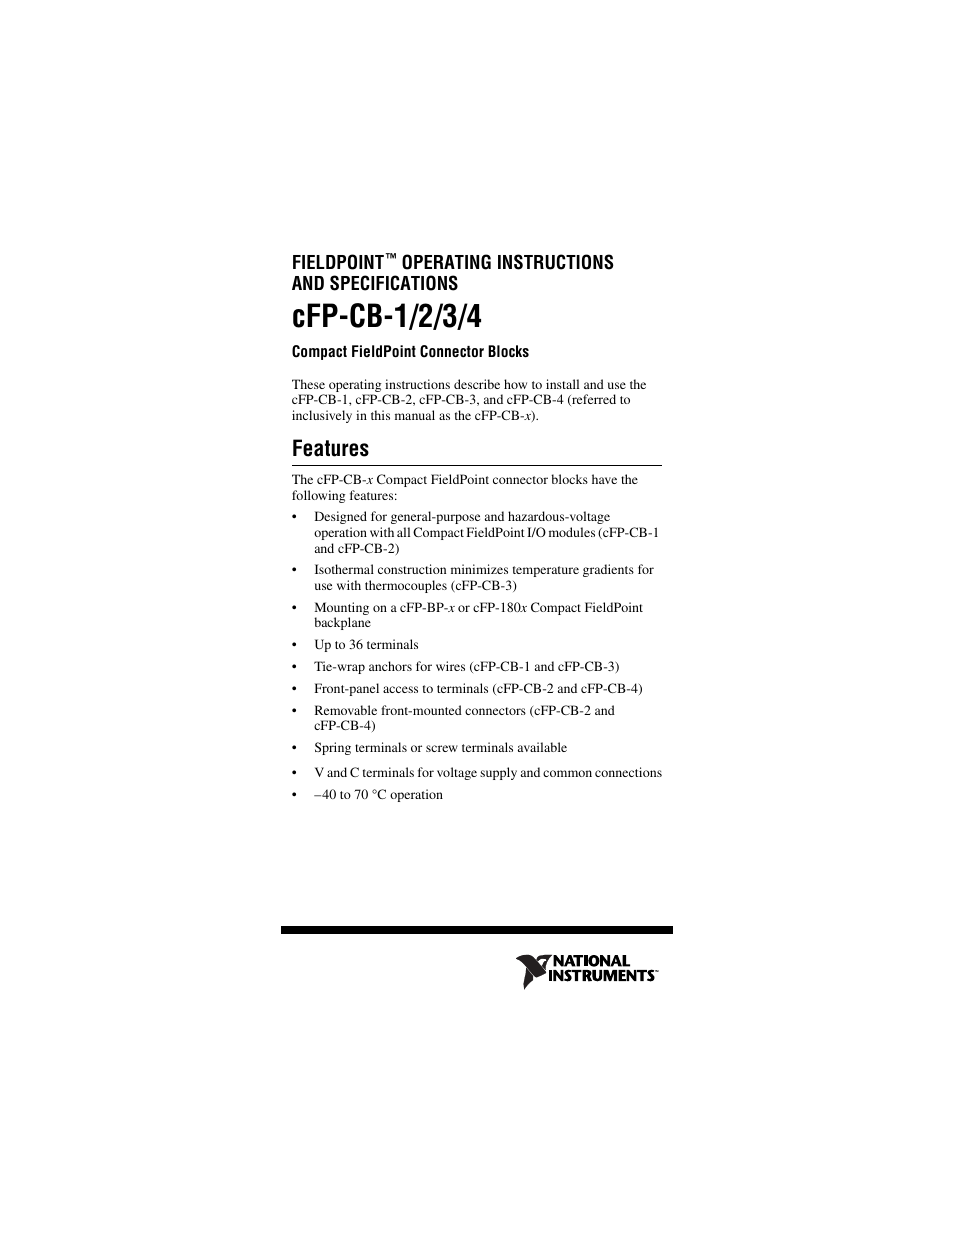 National Instruments CFP-CB-3 User Manual | 20 pages